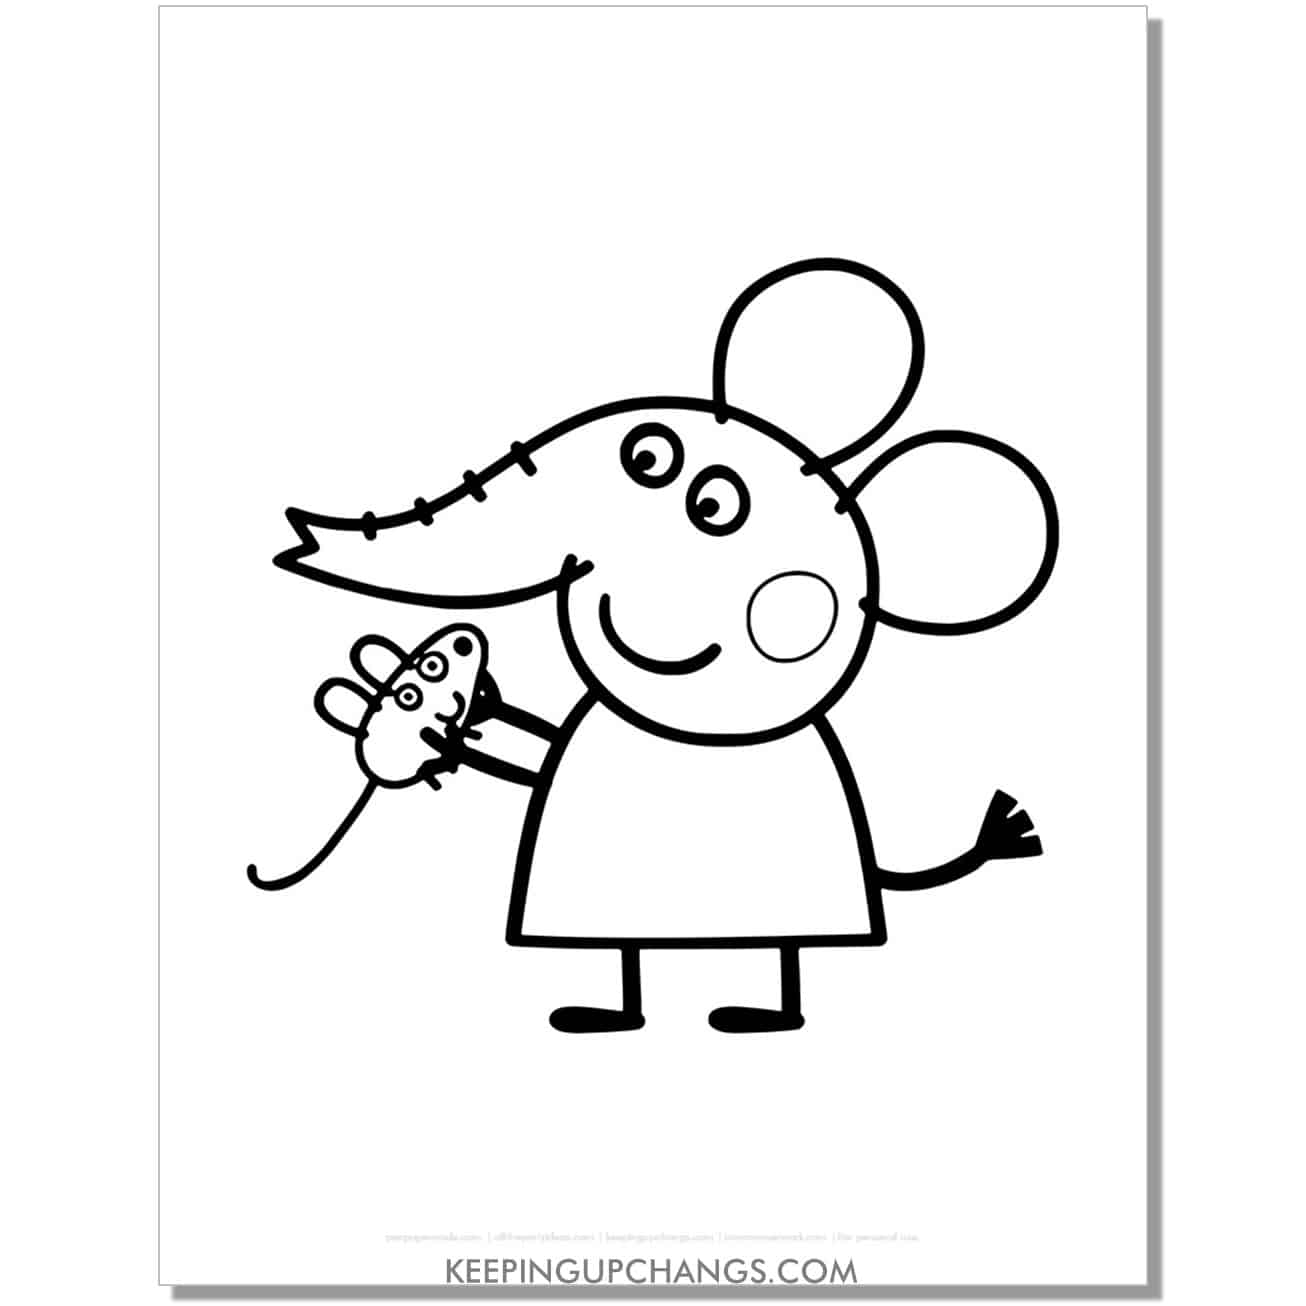 free emily elephant playing with mouse peppa pig coloring page, sheet.